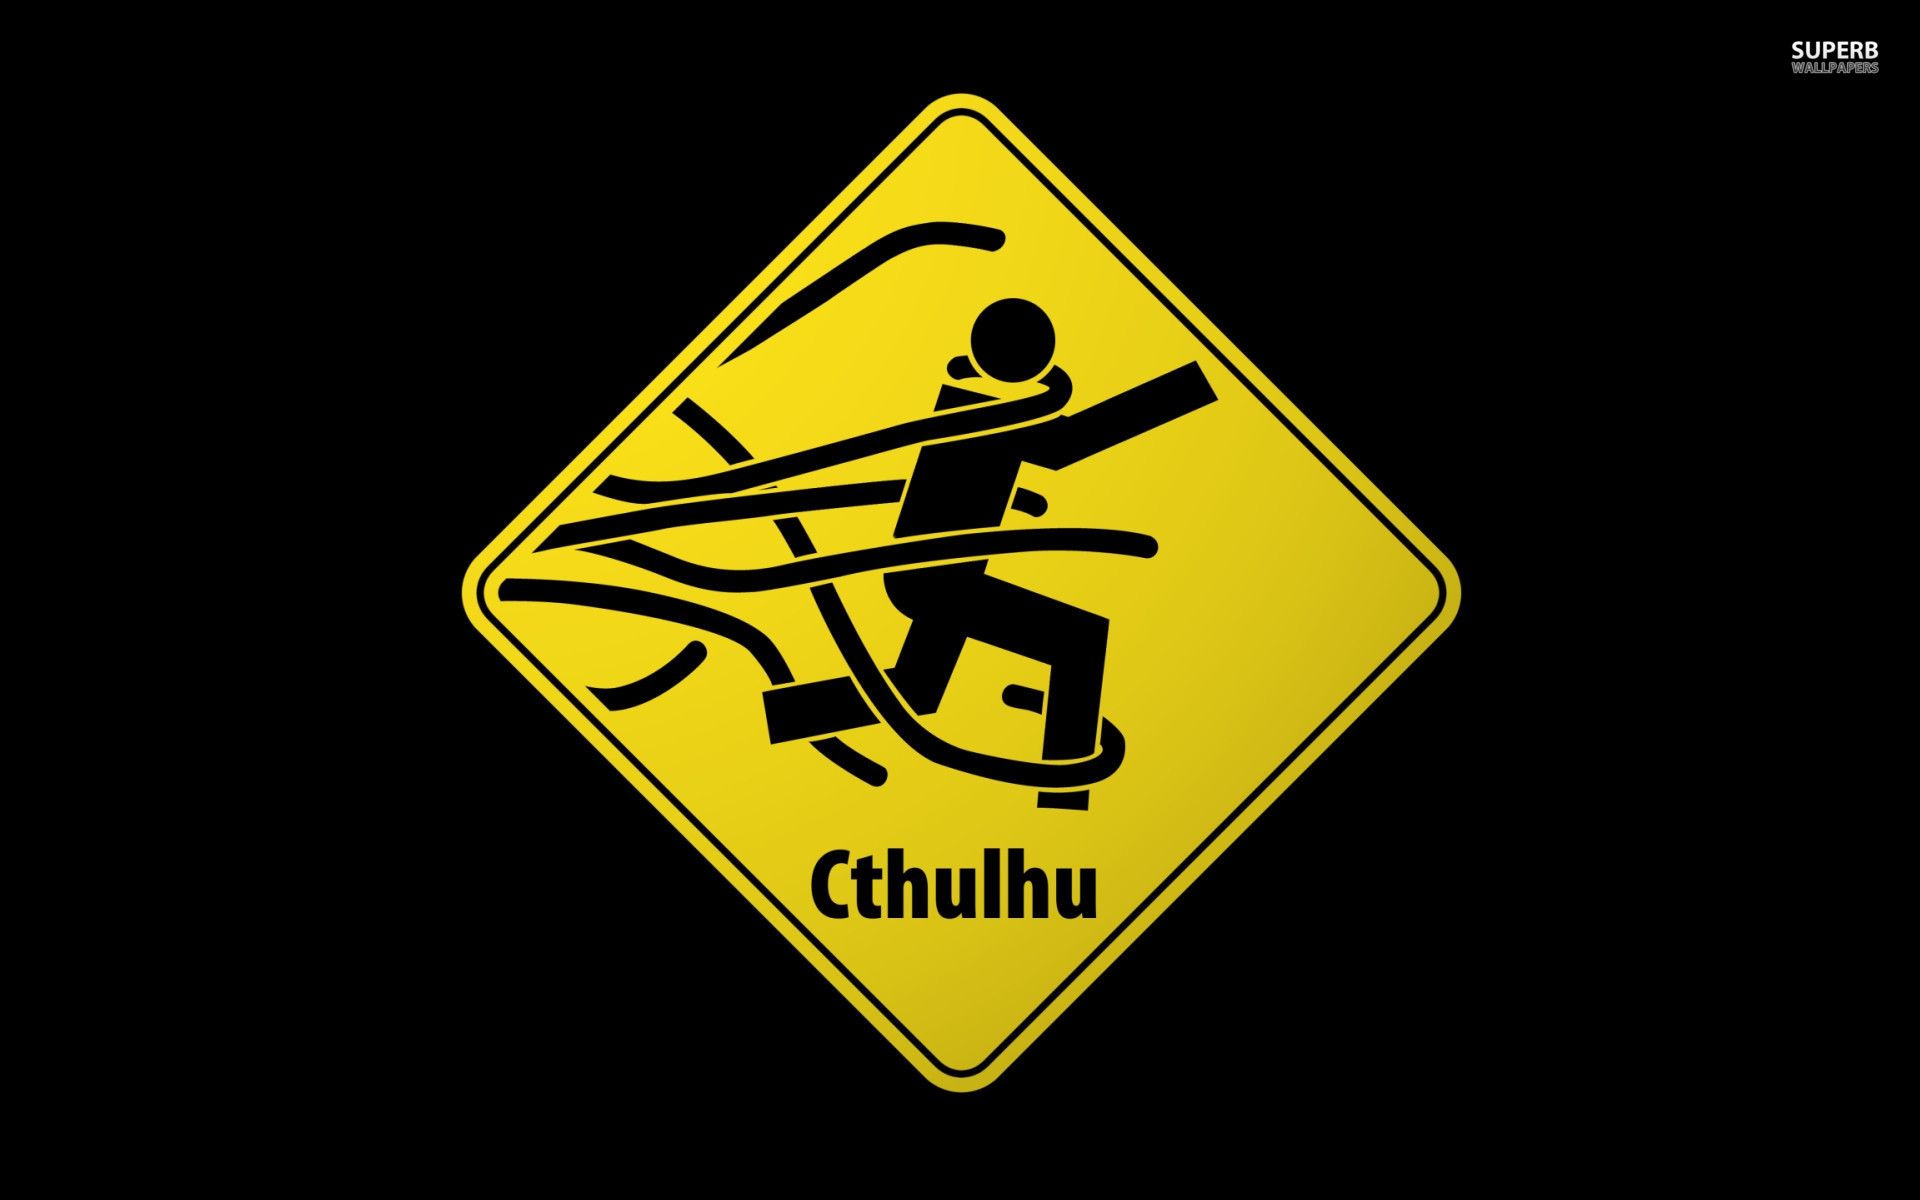 Beware of Cthulhu wallpaper - Funny wallpapers - #27183